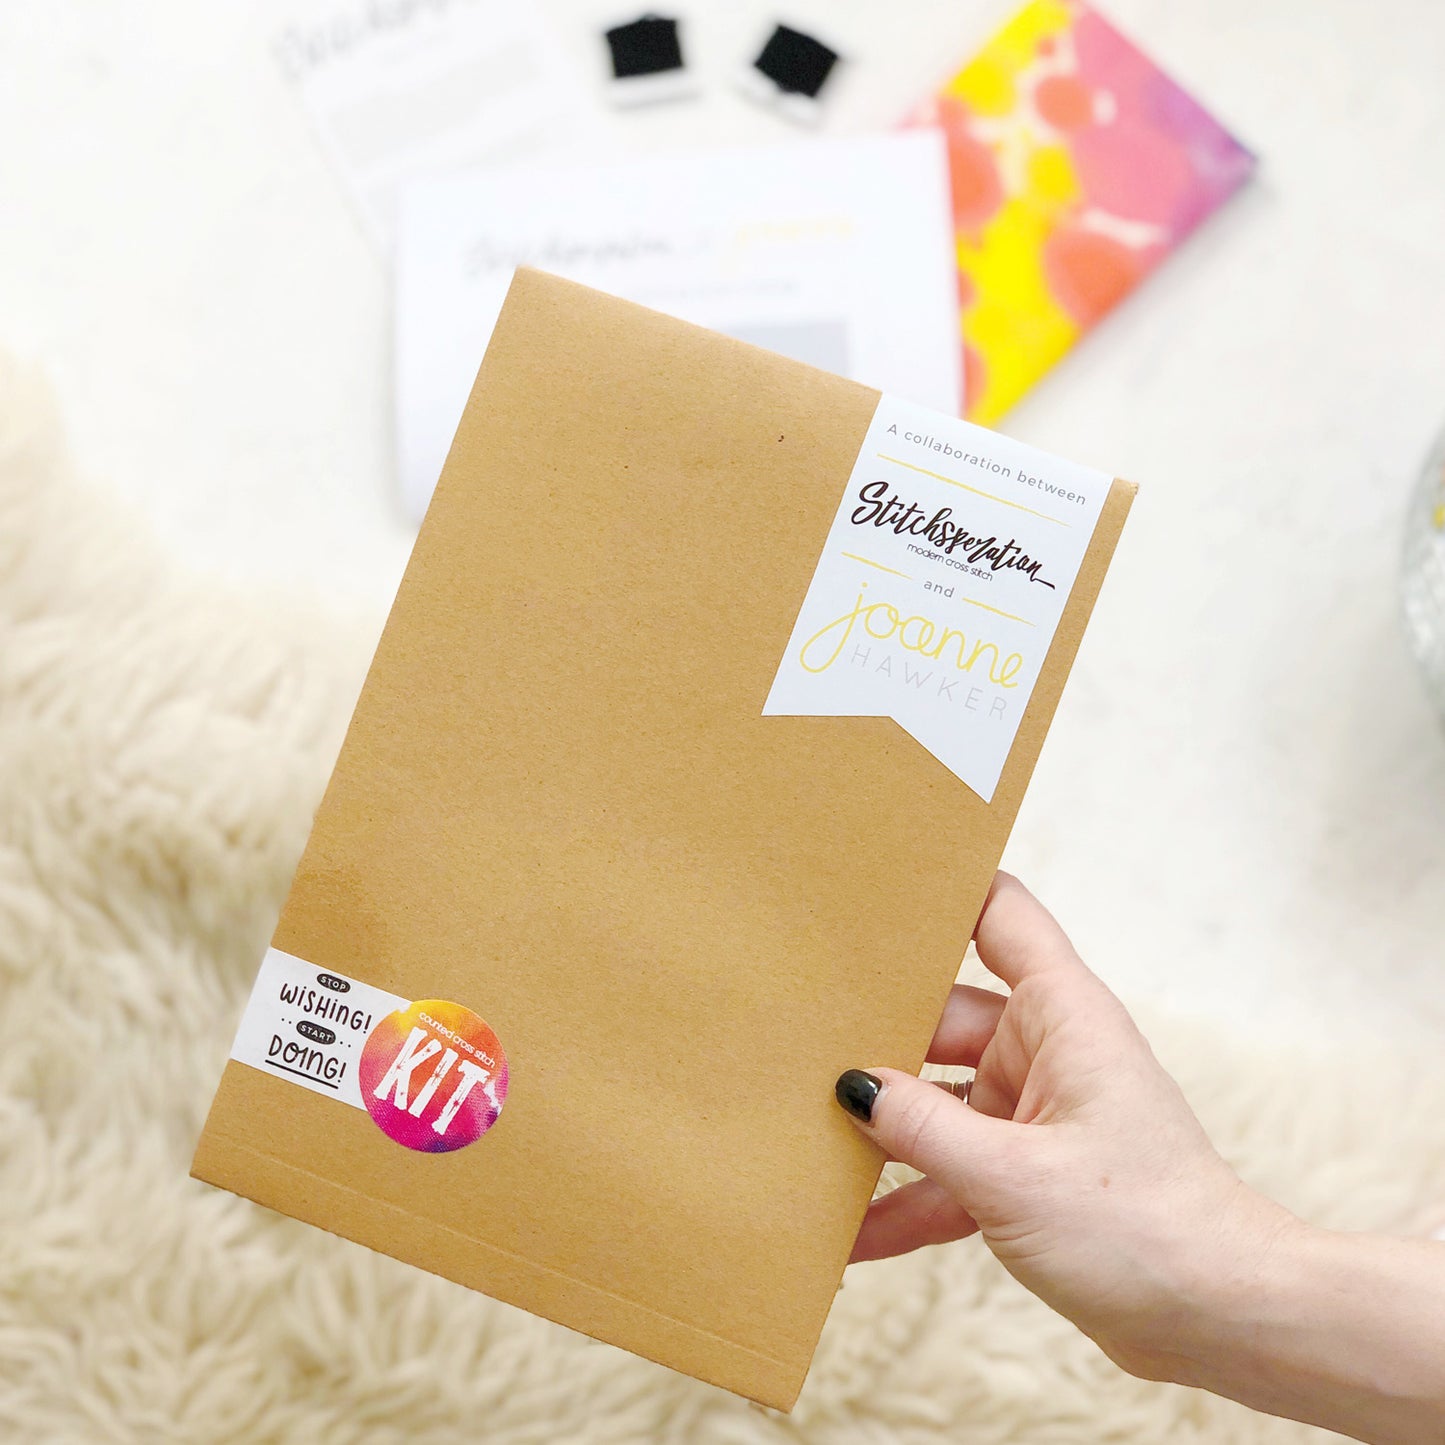 The stop wishing start doing collaboration kit comes packaged in a limited edition brown envelope.